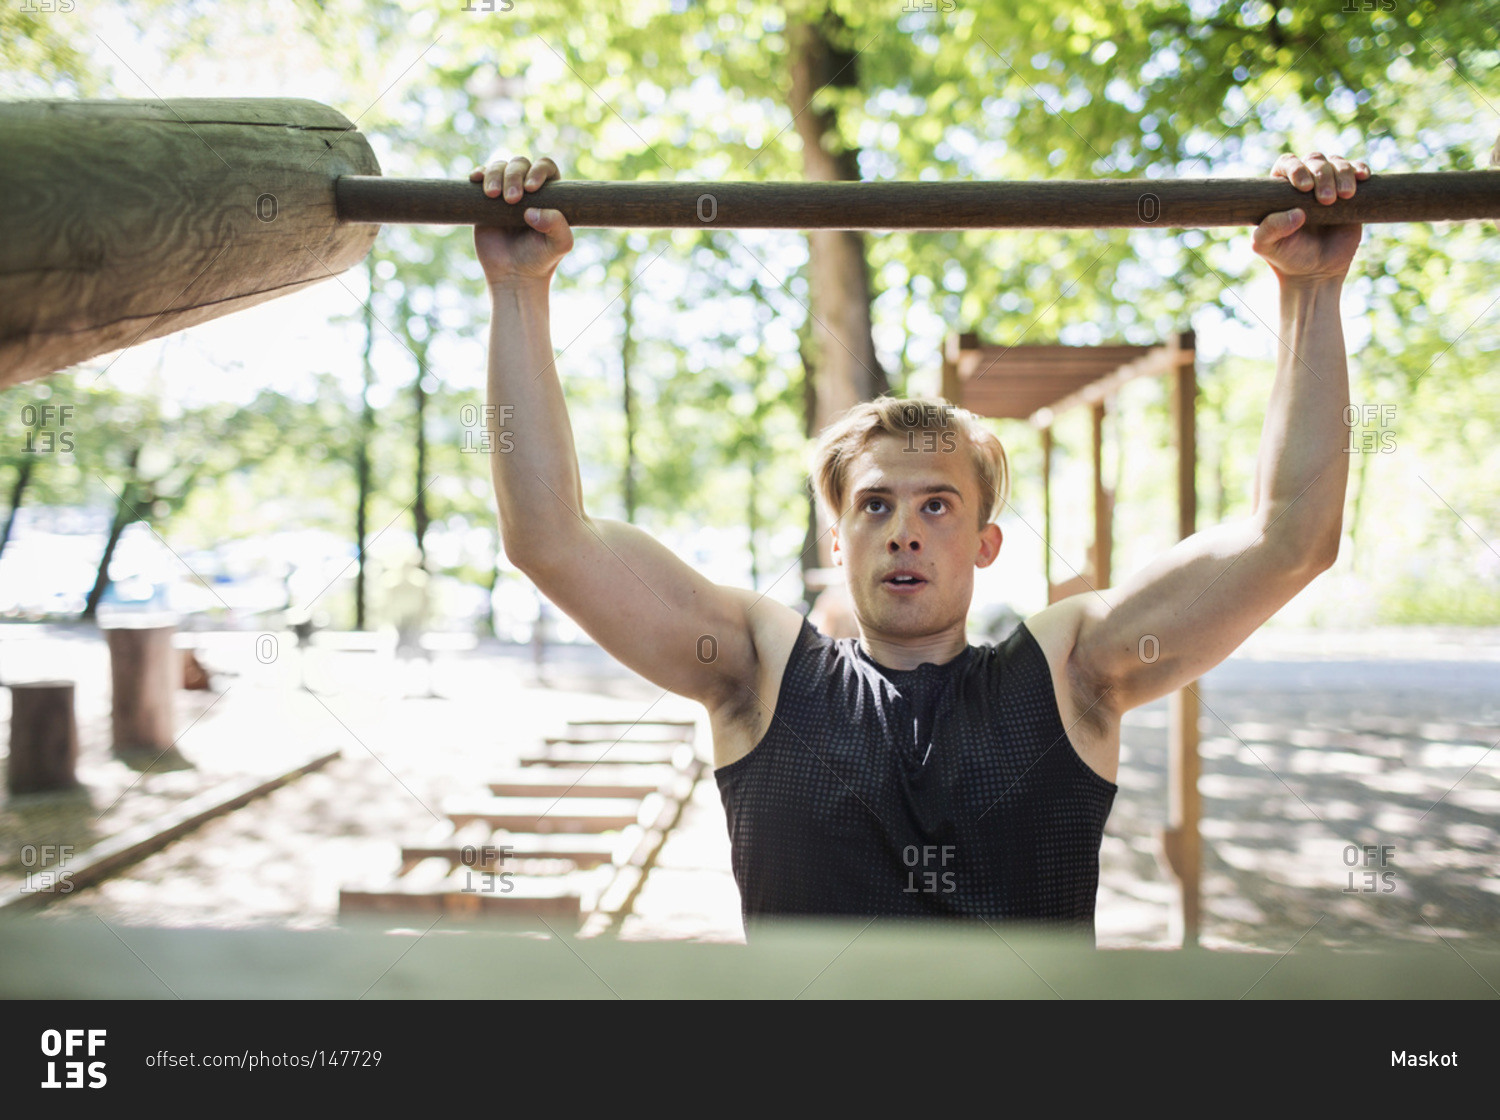 Determined man lifting wooden bar at outdoor health club